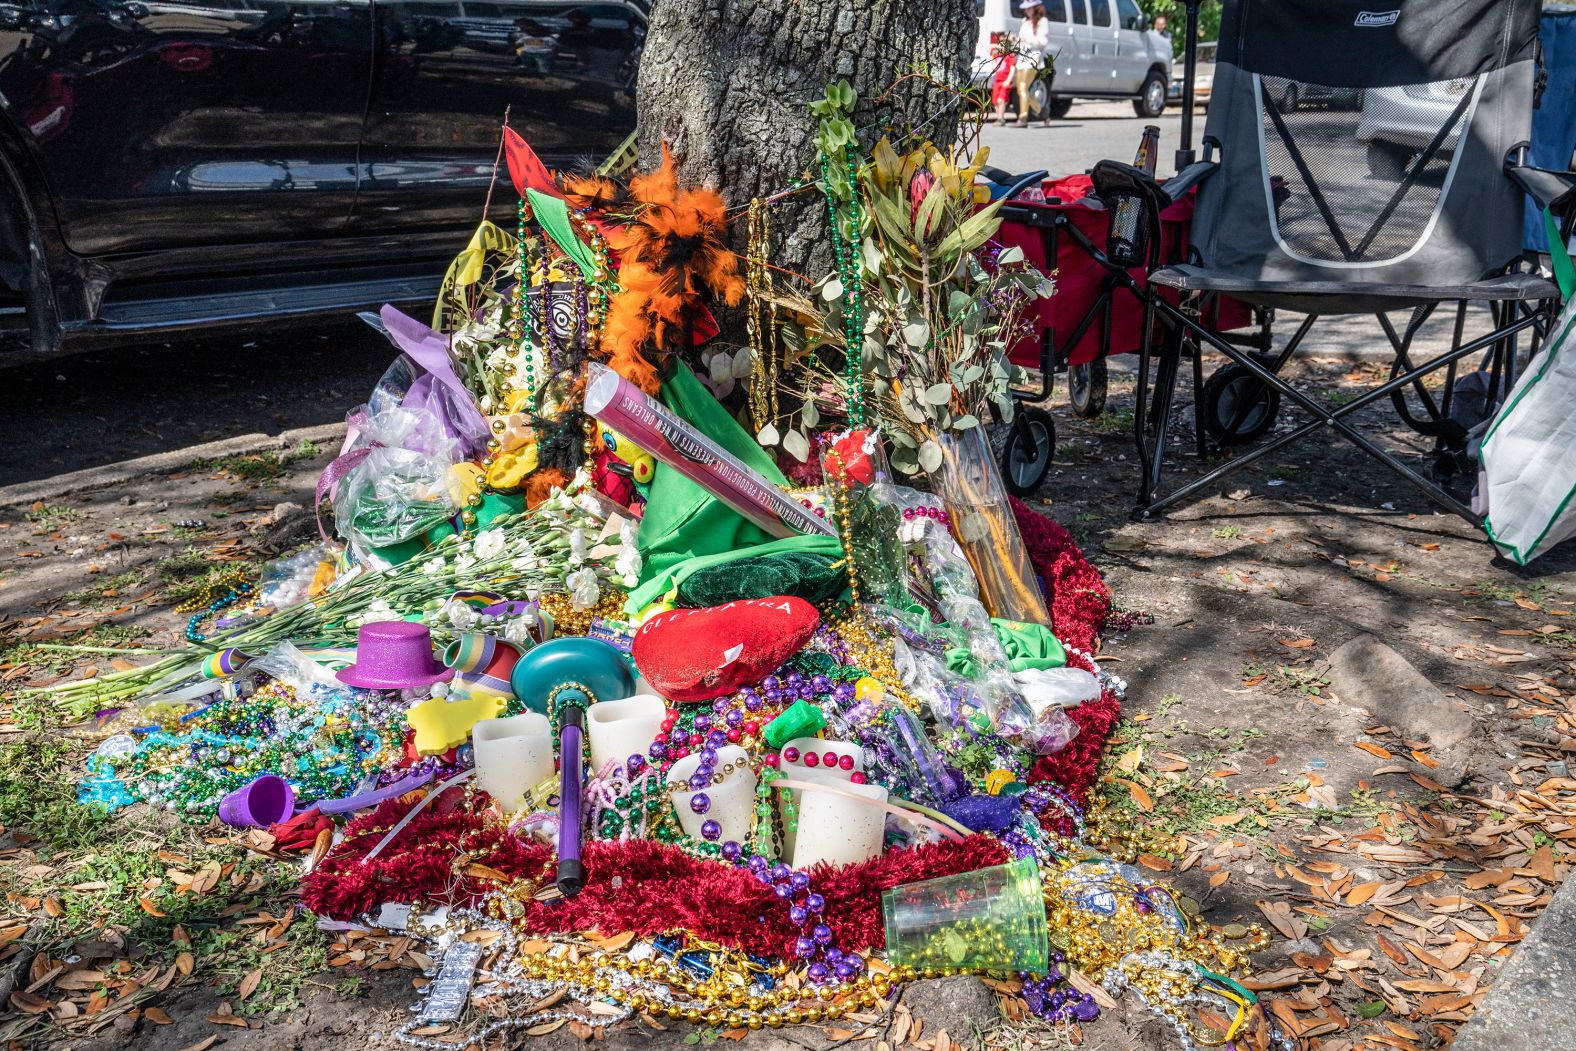 Paradegoers leave flowers and candles for a woman who was killed when she was hit by a tandem float this year. There was later another death that involved a tandem float, which has two or more floats connected together by a hitch and pulled by a tractor. New Orleans officials <a href="index.php?page=&url=https%3A%2F%2Fwww.cnn.com%2F2020%2F02%2F23%2Fus%2Fnew-orleans-person-killed-tandem-float%2Findex.html" target="_blank">banned tandem floats</a> in the wake of those deaths.